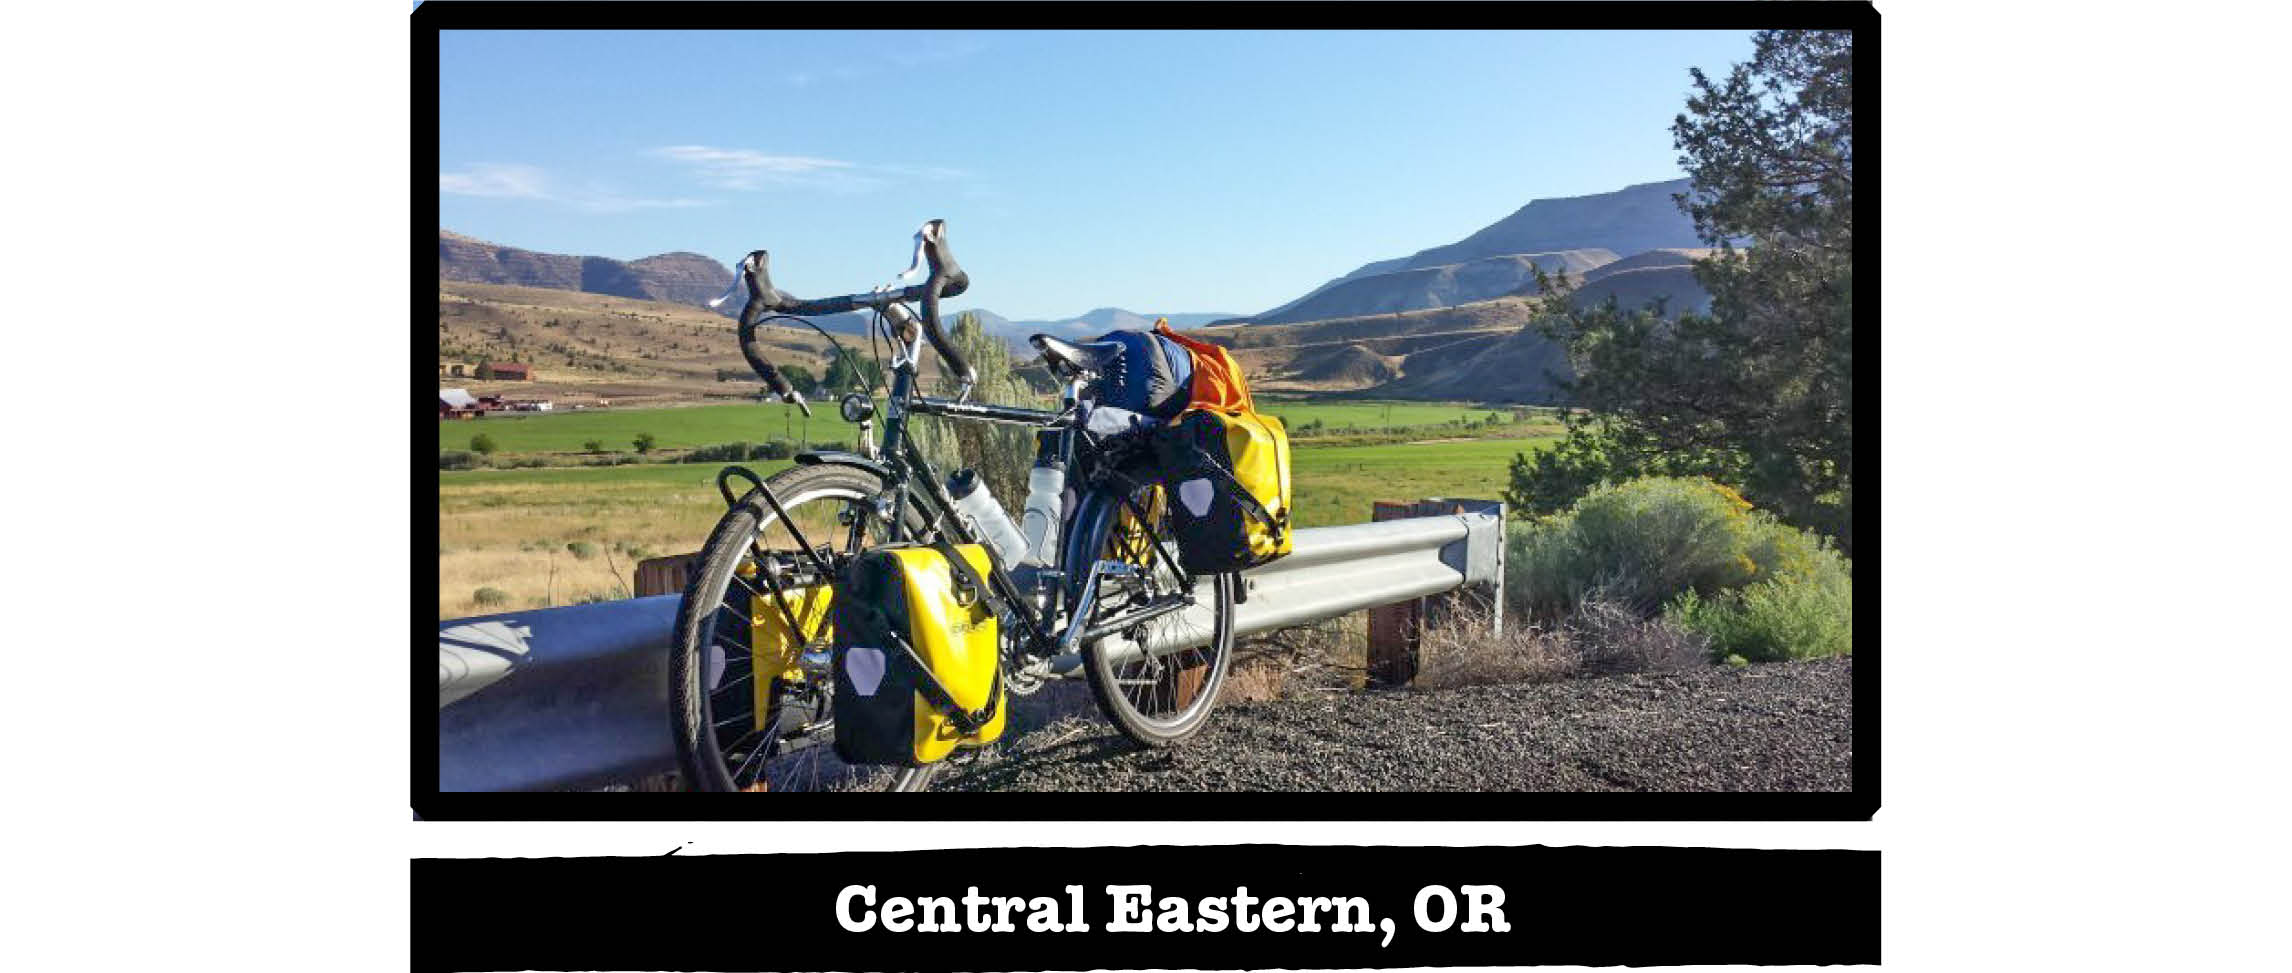 Left side view of a Surly Long Haul Trucker bike, along a rail with hills behind - Central Eastern, OR tag below image